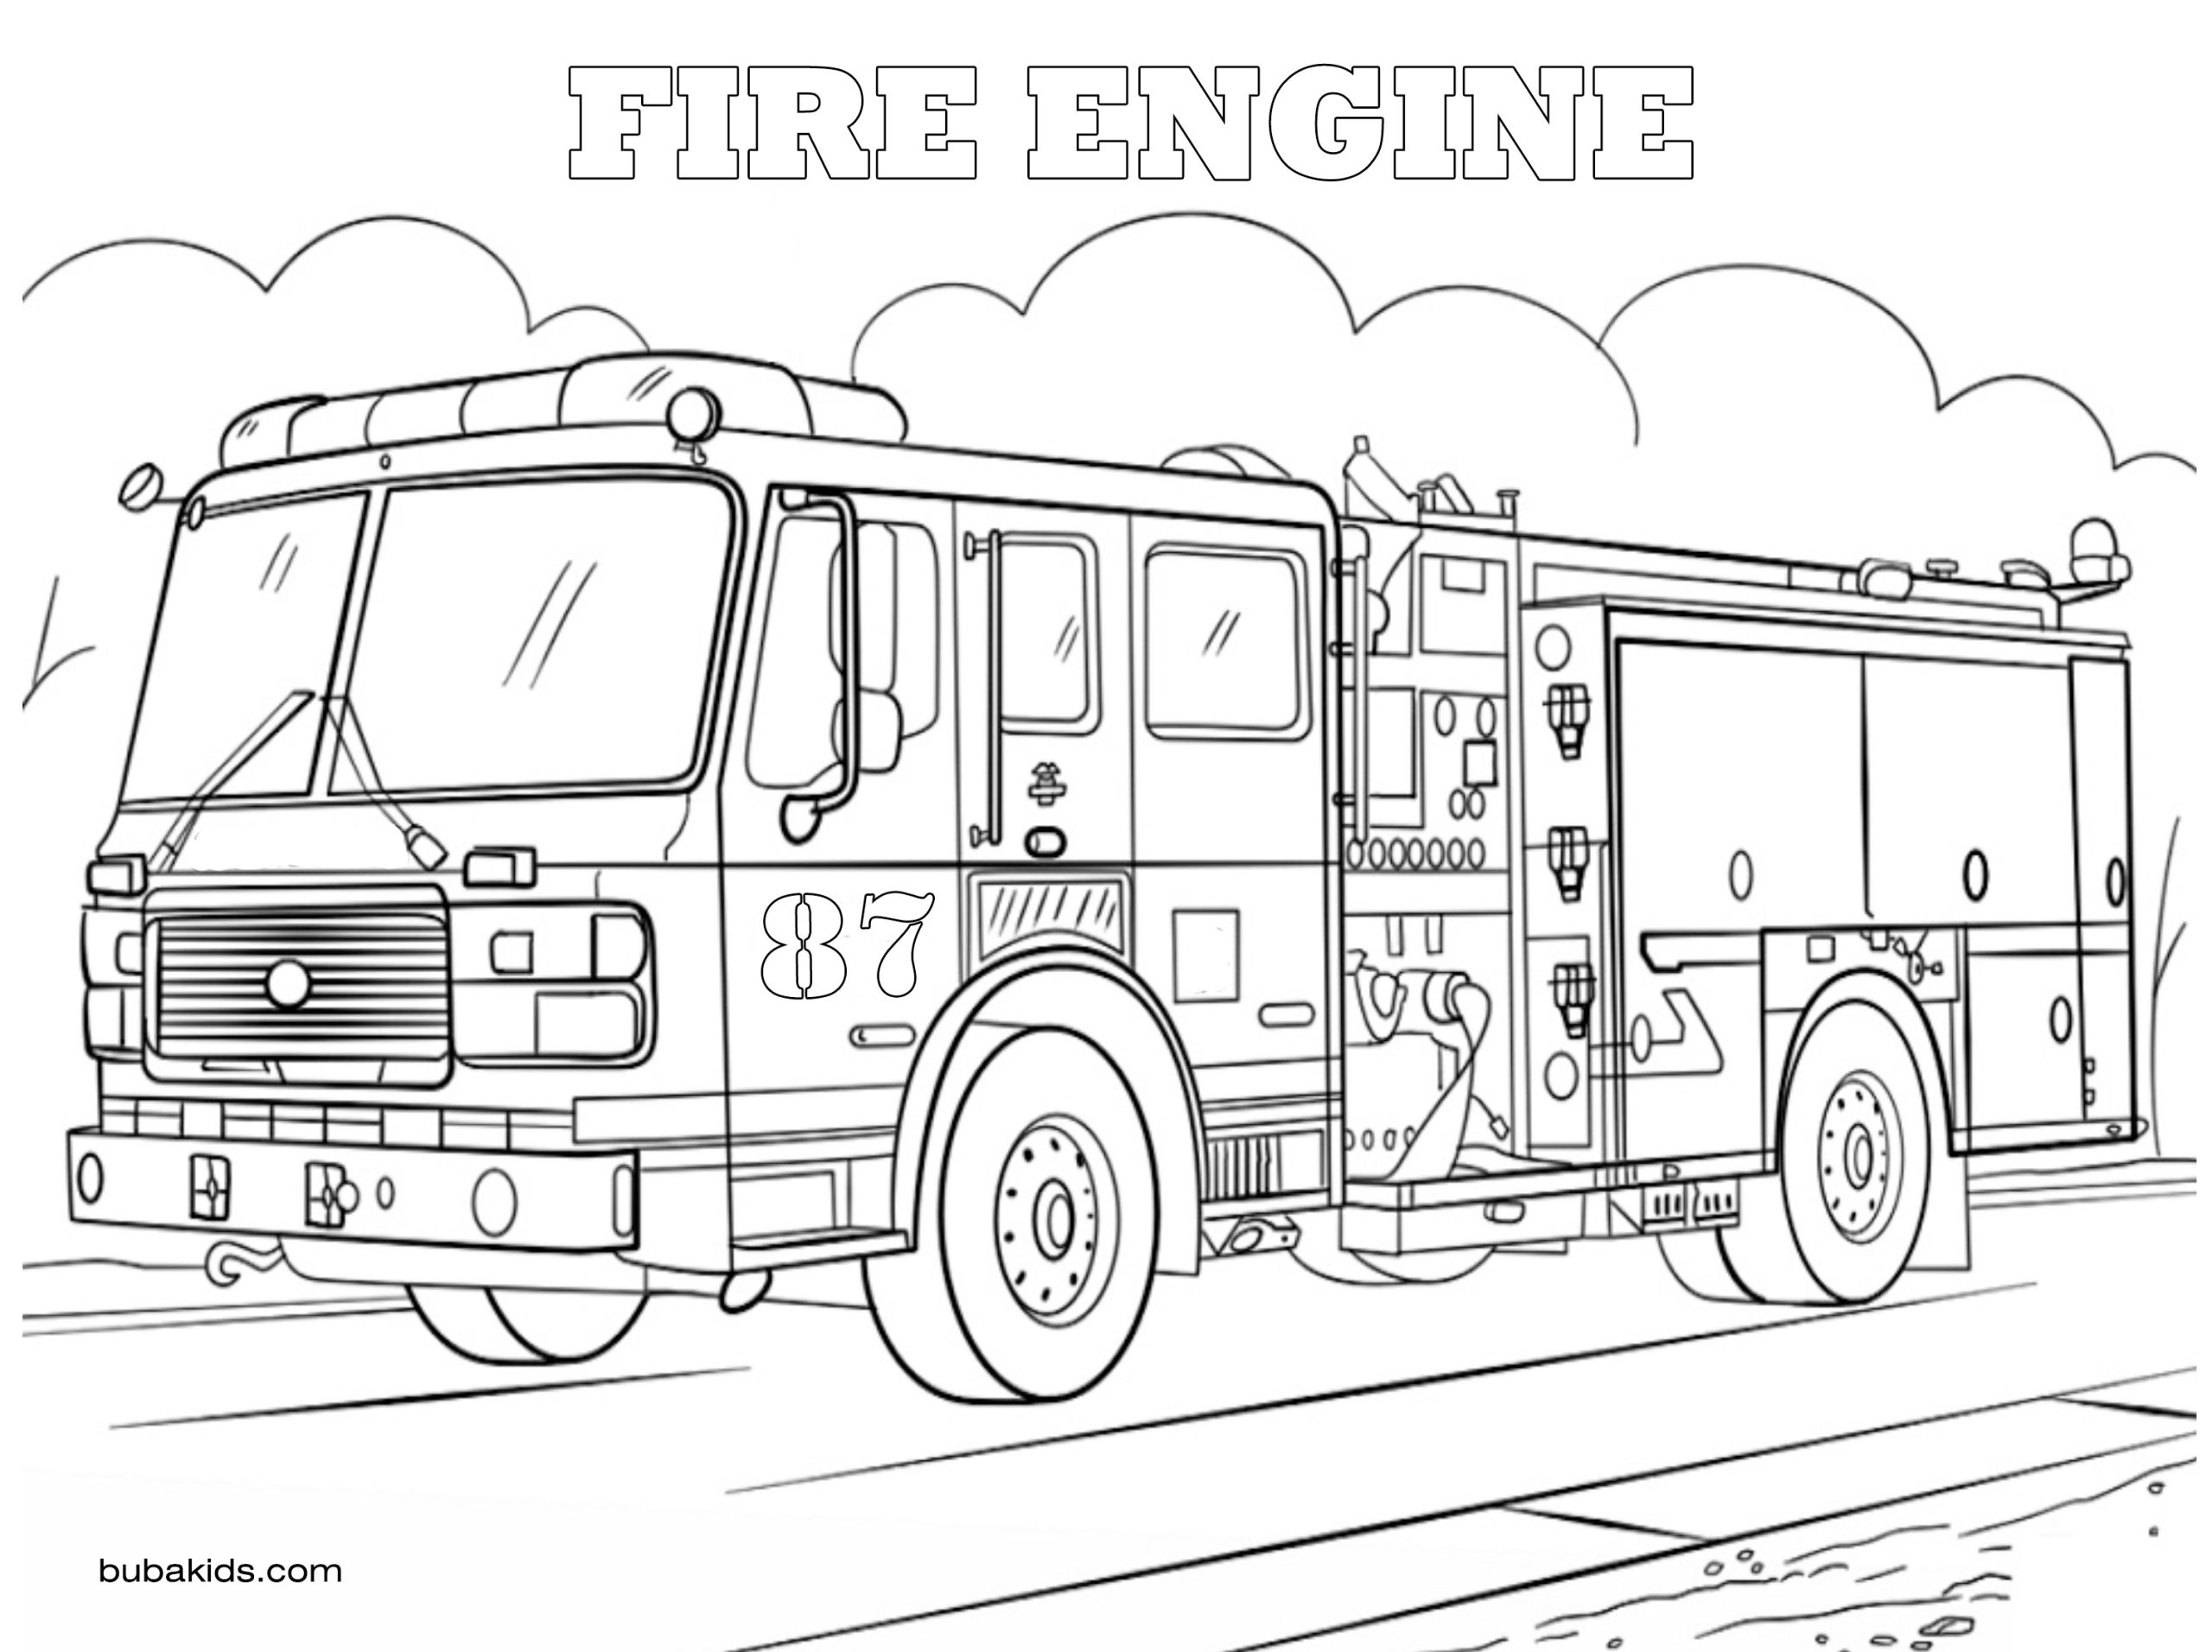 Fire engine coloring pages thank you firefighters coloring | BubaKids.com